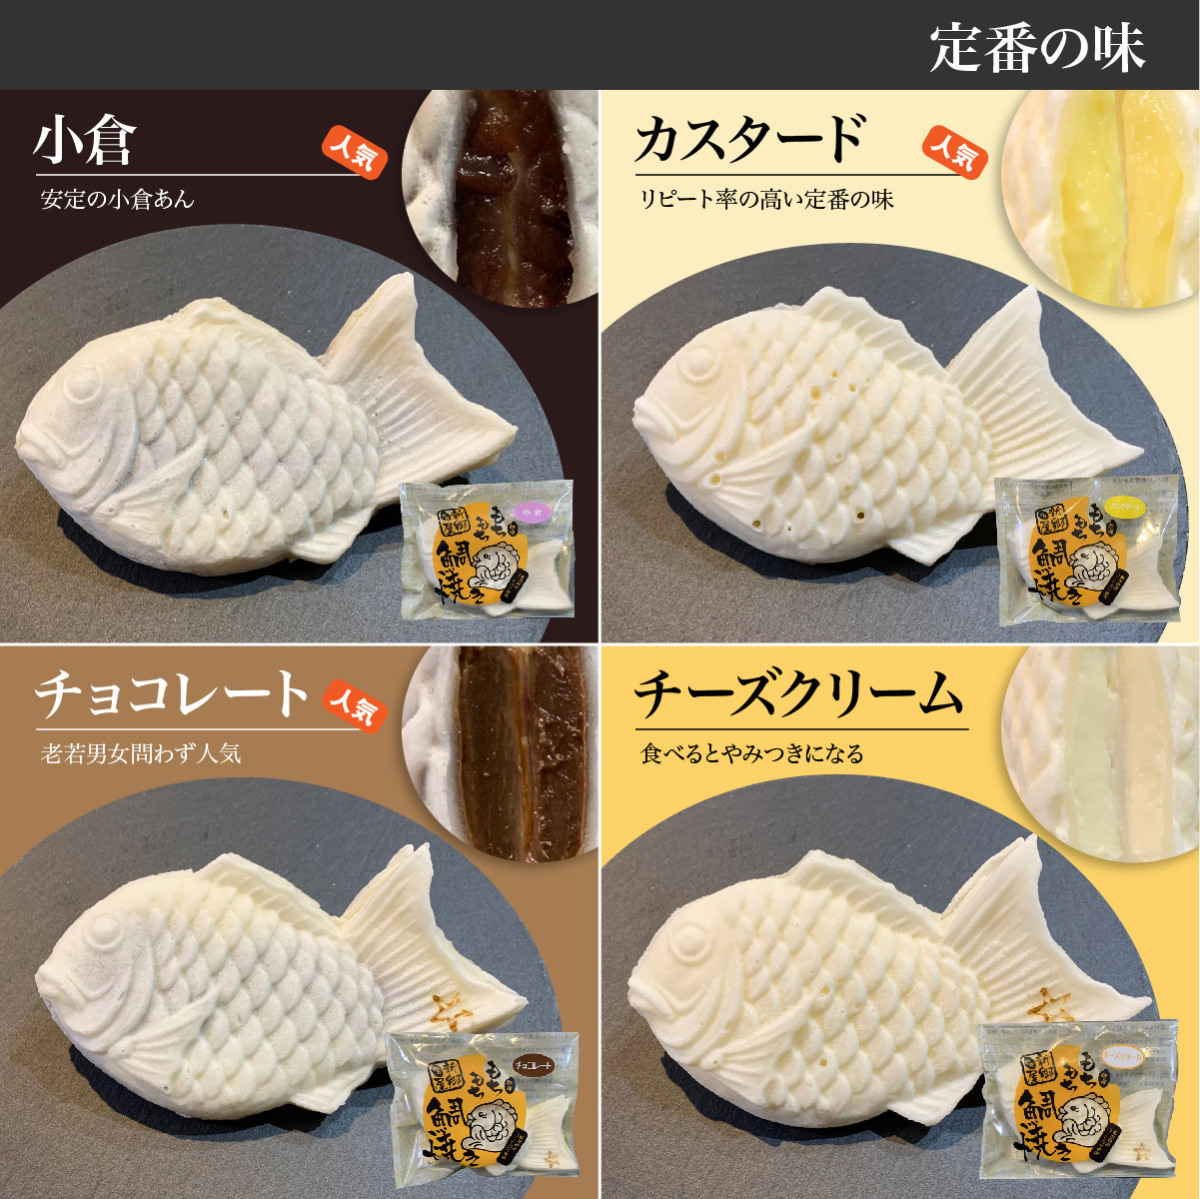  free shipping matsuko. .. not world . also introduced!. after mochi mochi sea bream roasting is possible to choose 15 piece set limited time . after . strawberry .. sea bream roasting 